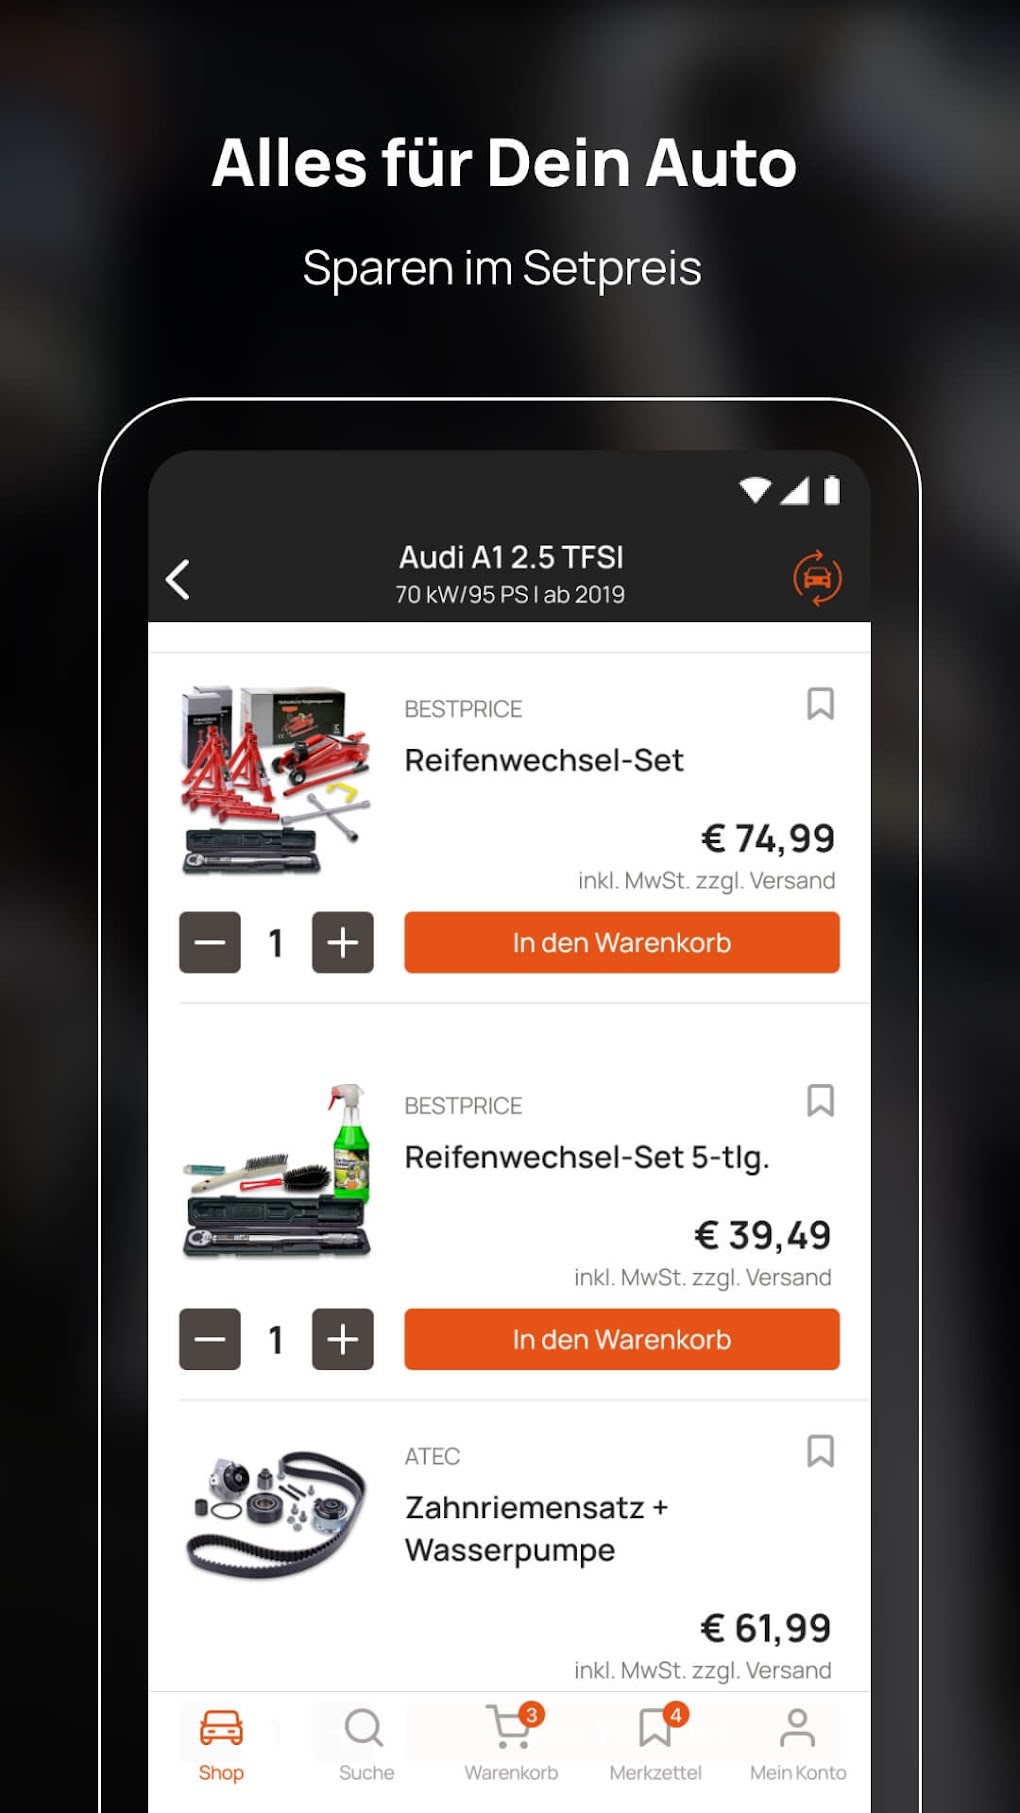 ATP Autoteile: KFZ PKW Teile for Android - Download